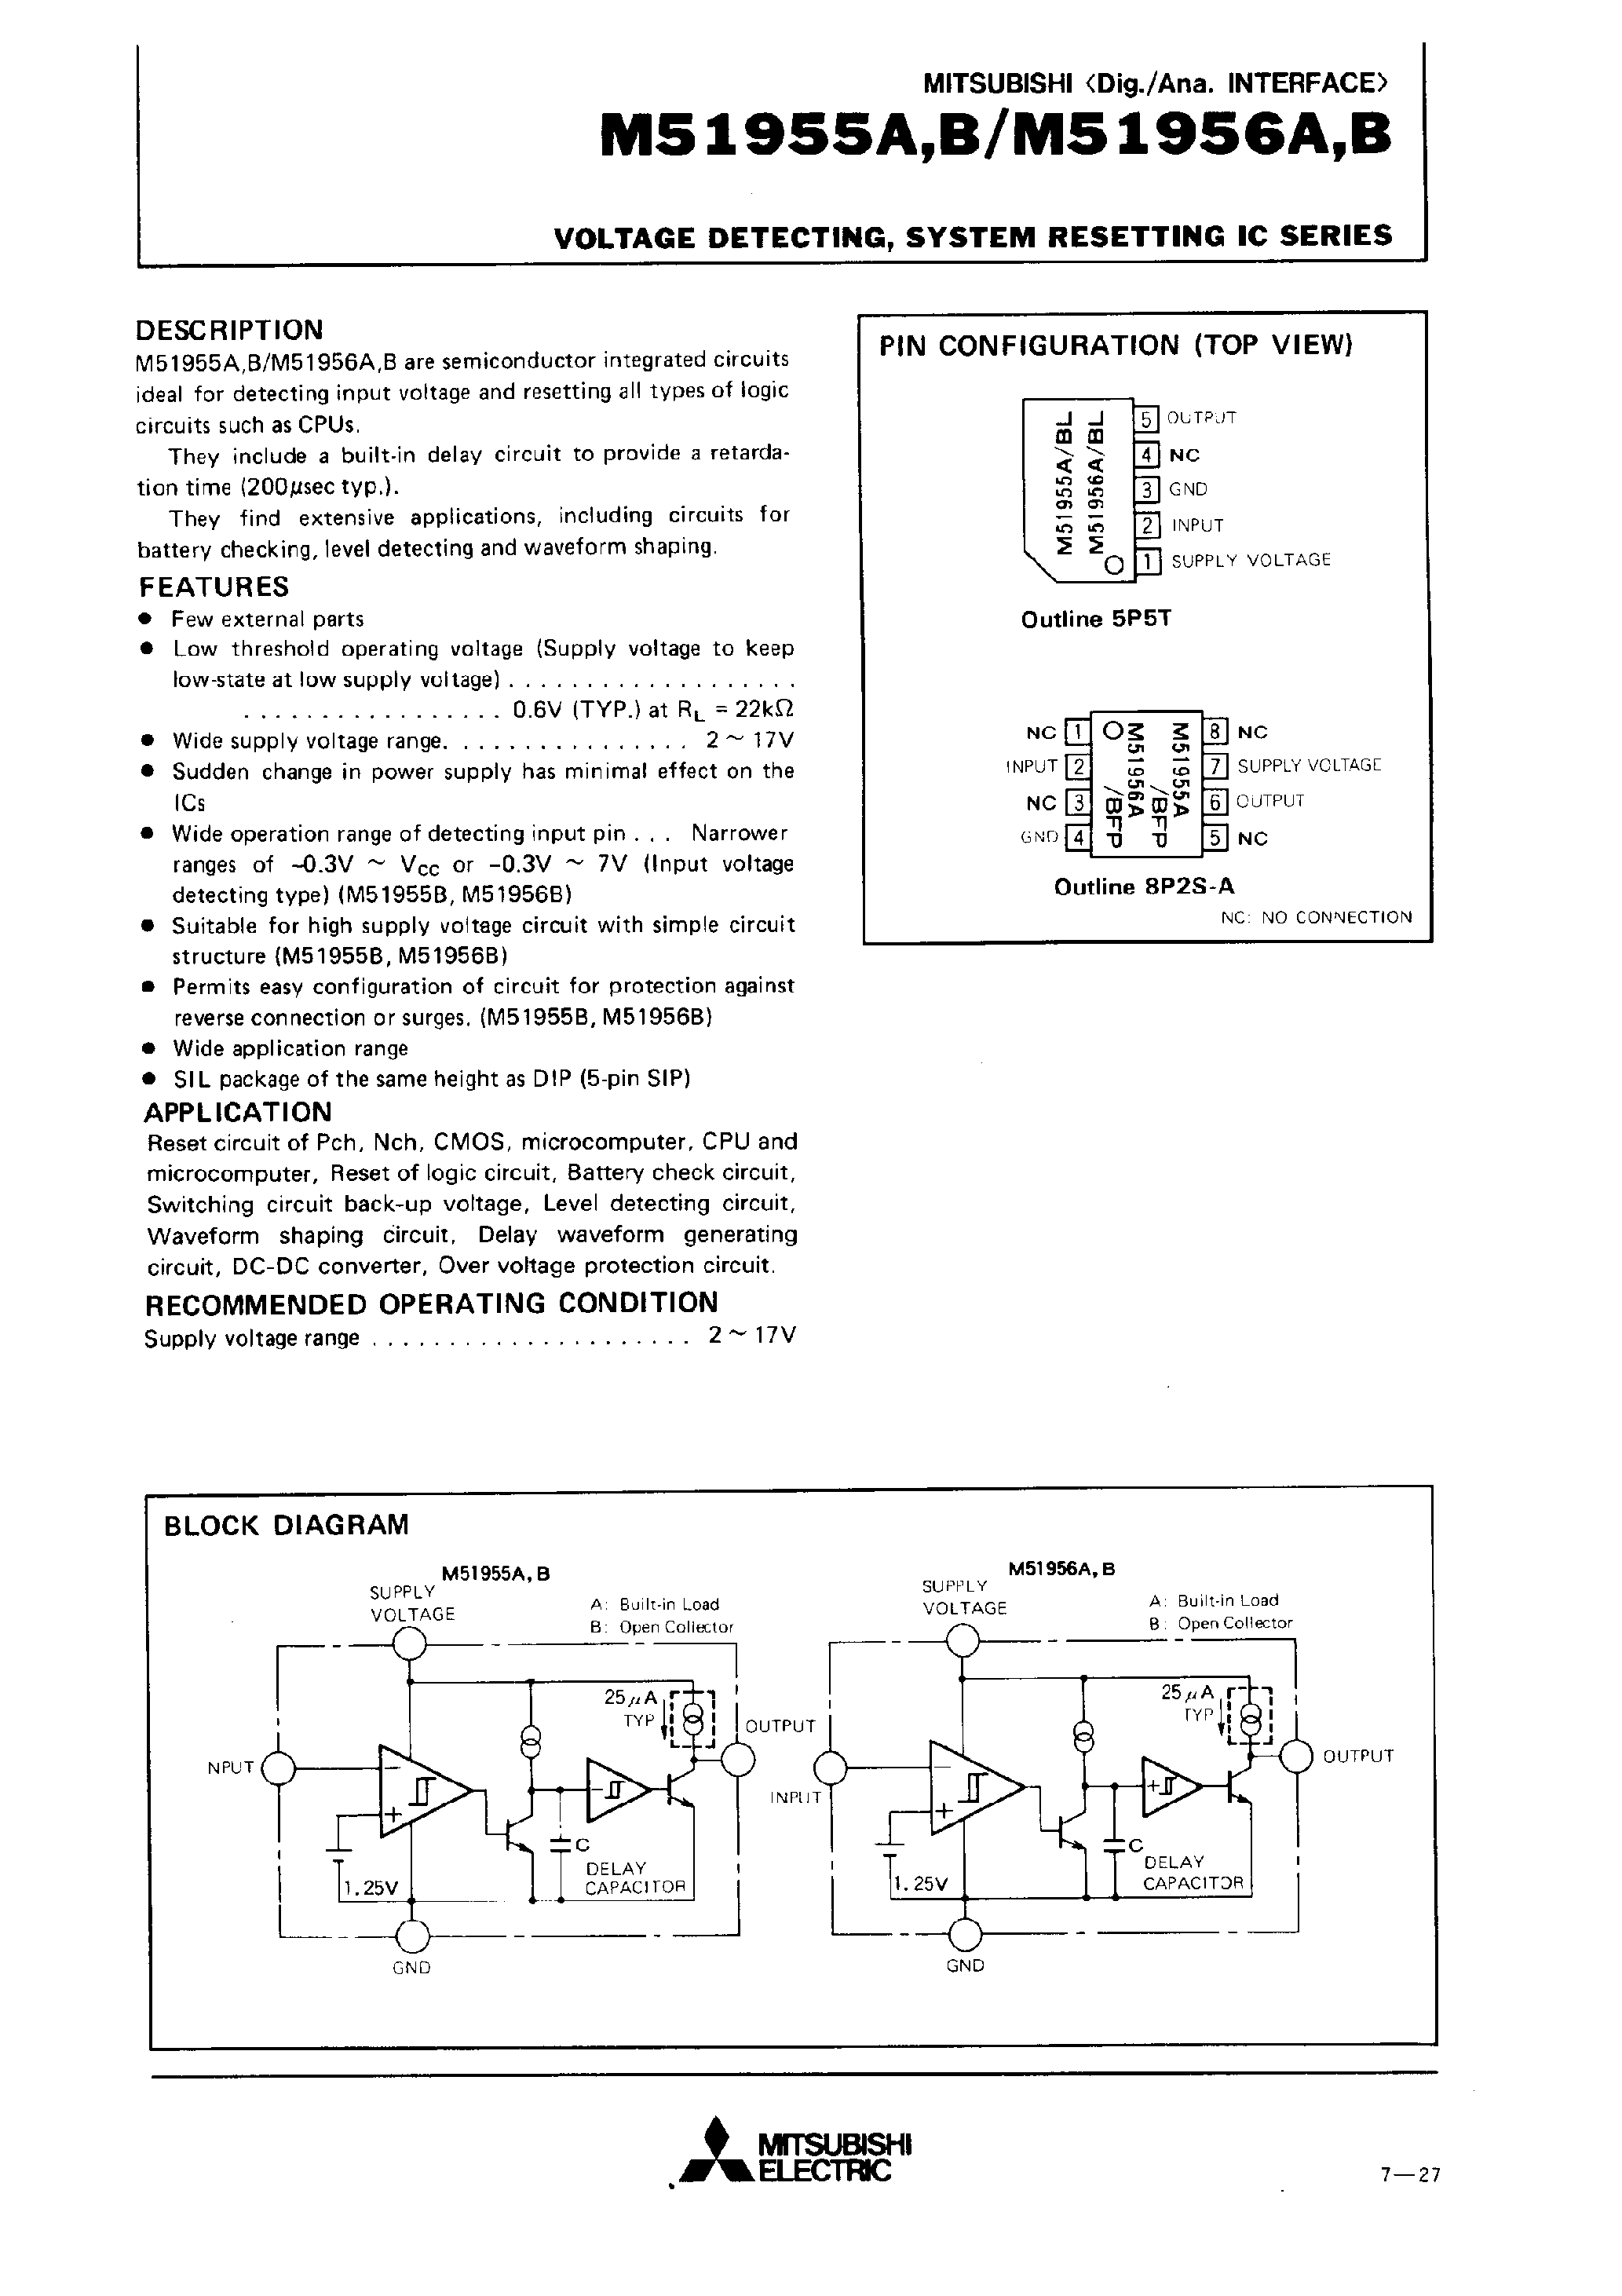 Datasheet M51956A - VOLTAGE DETECTING/ SYSTEM RESETTING IC SERIES page 1